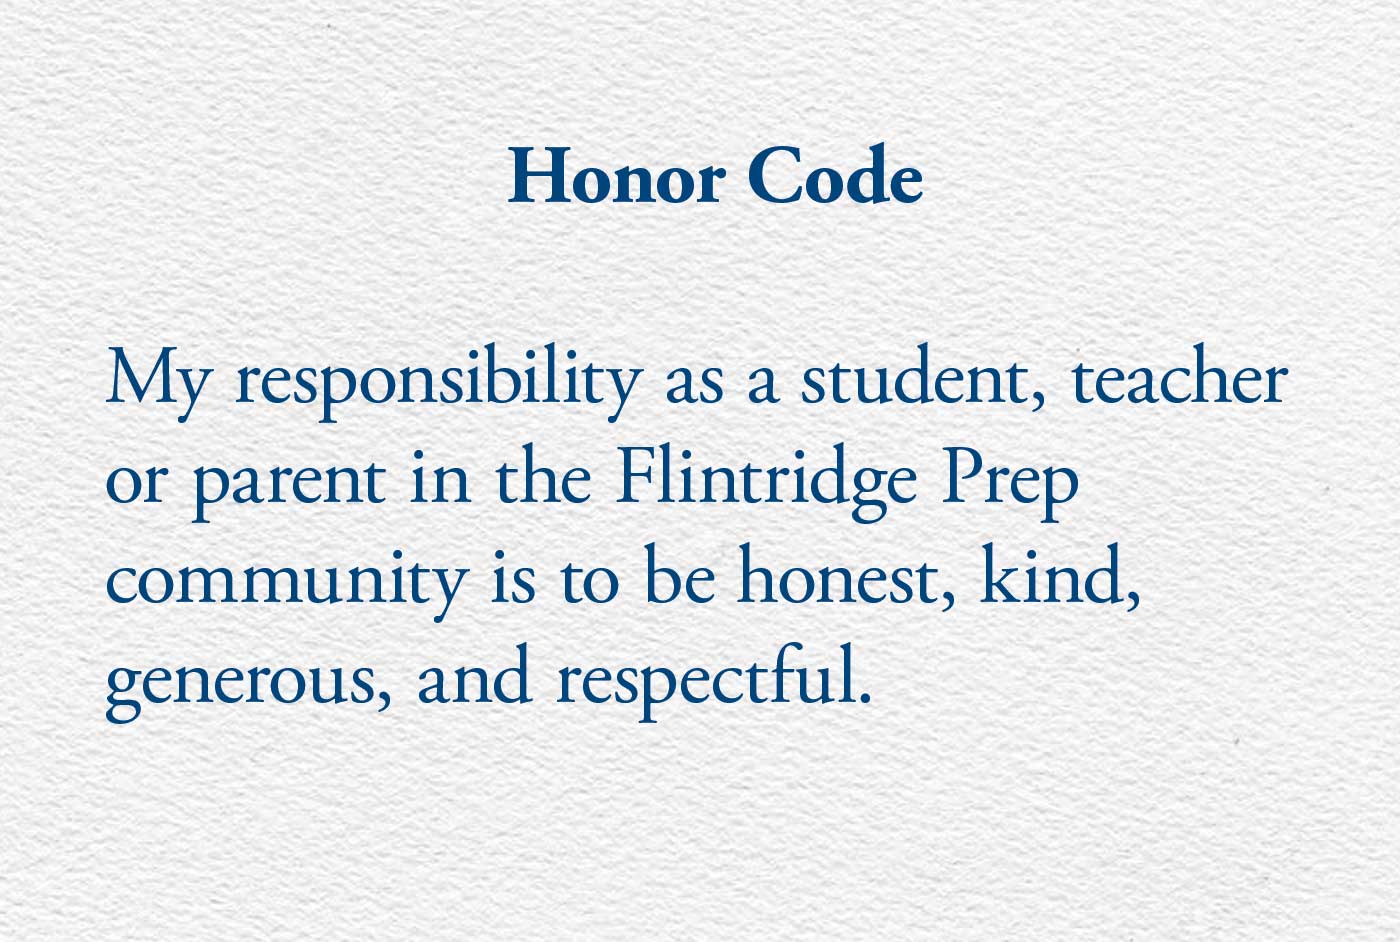 Honor Code Adopted Campaign For Prep